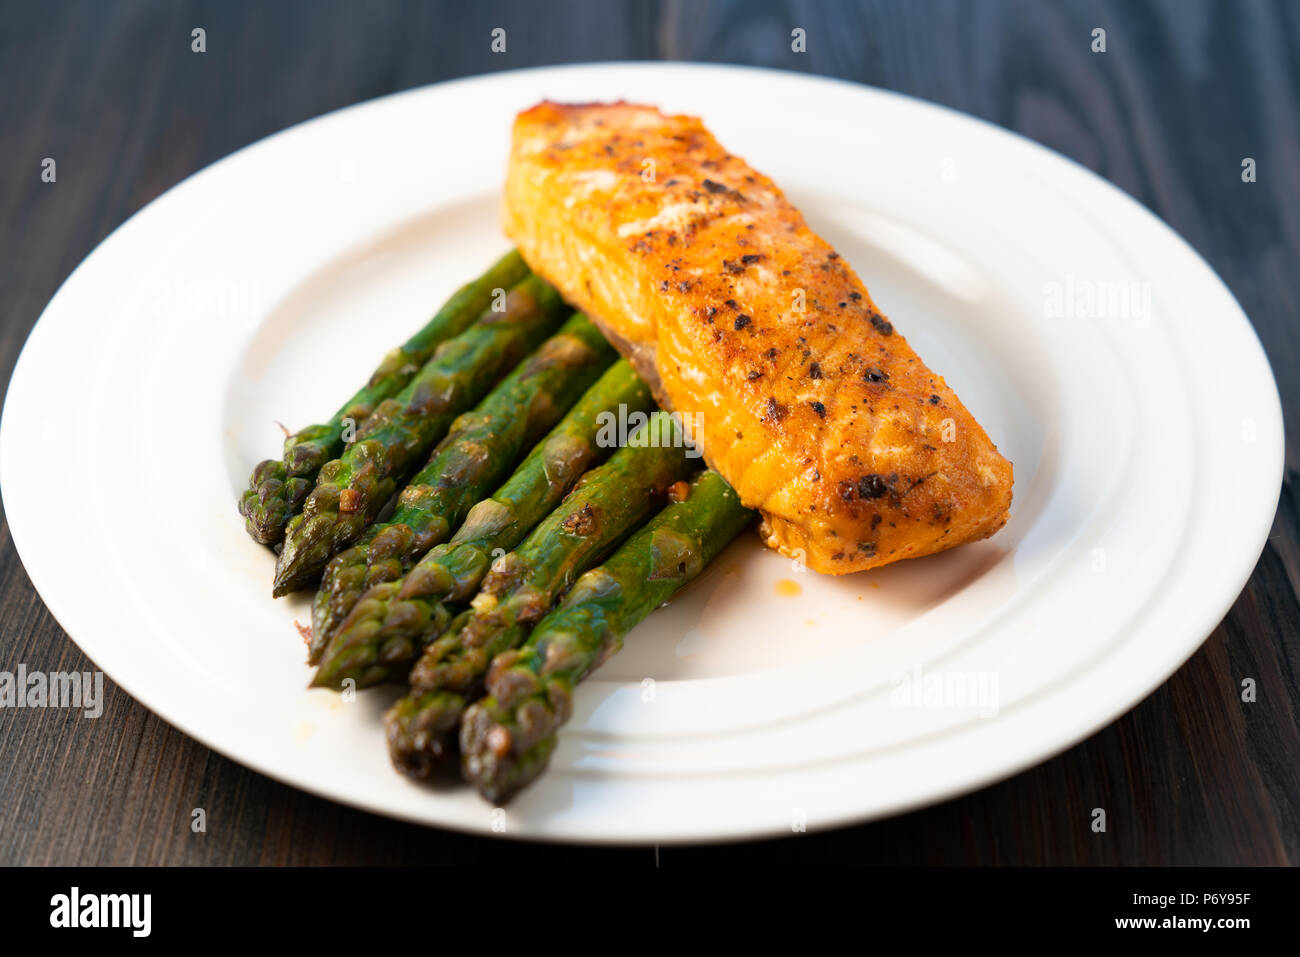 White plate with roasted salmon filet with fried asparagus on a dark wooden background Stock Photo